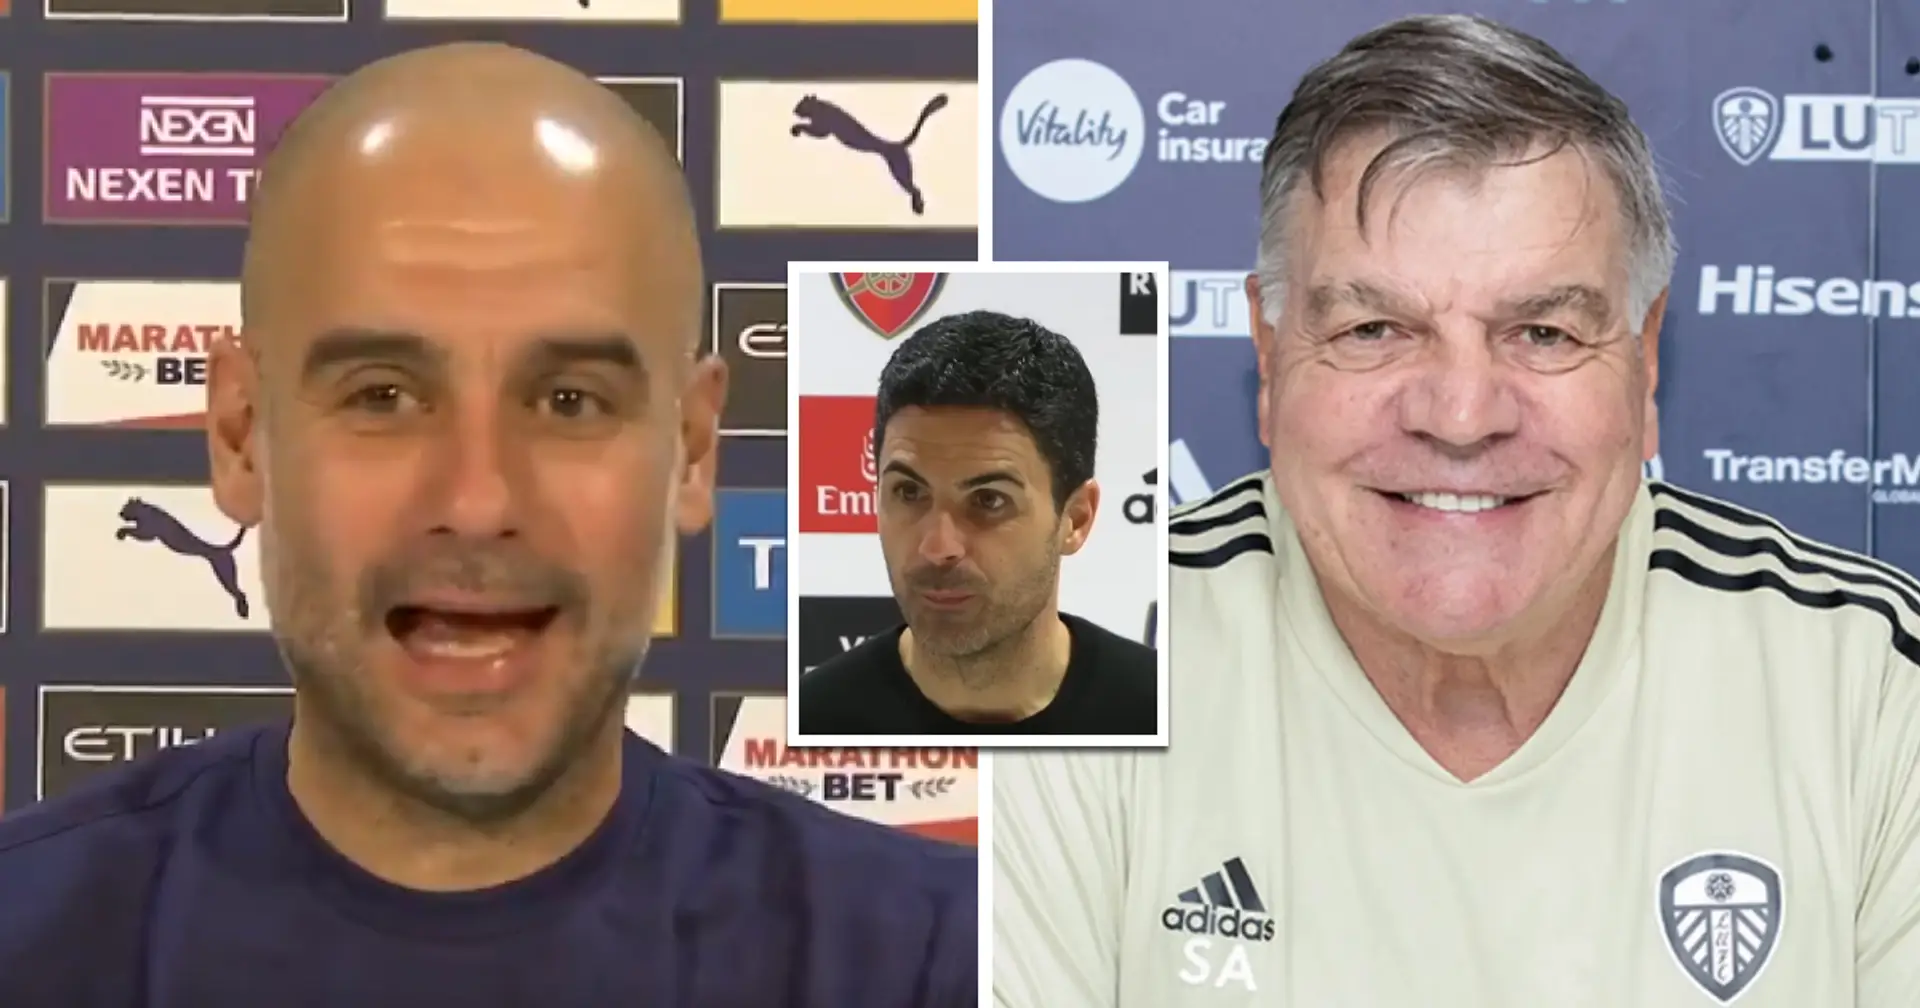 Recalling what Pep Guardiola said about Sam Allardyce who may give Arsenal lifeline in title race